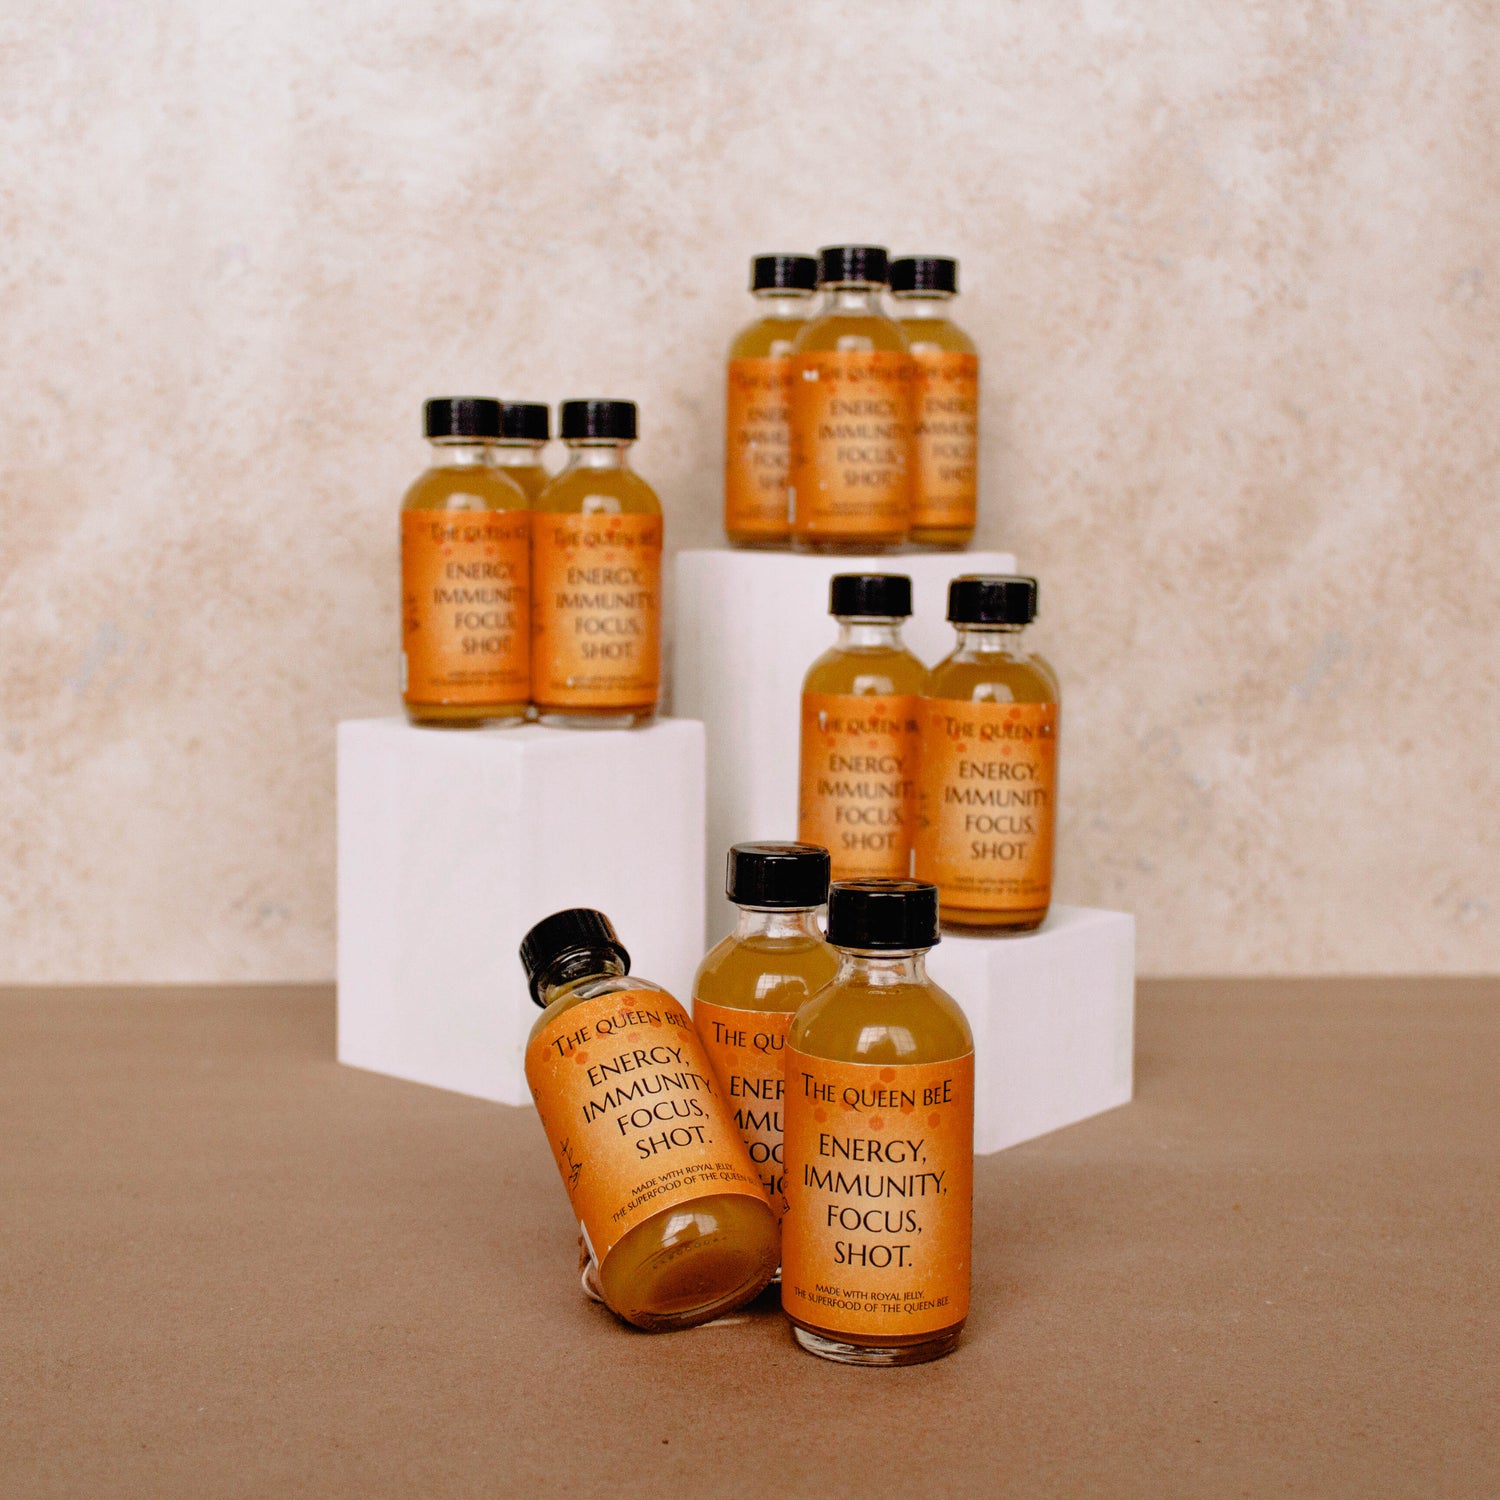 Photo of our 12 pack wellness shot, expertly formulated with just 6 ingredients sourced furor 4 continents around the world. Freshly juiced ginger from Peru, turmeric from India, lemons from Florida, cayenne from Japan, royal jelly from the Amazon rainforest, and buckwheat honey straight from our local bee farms.